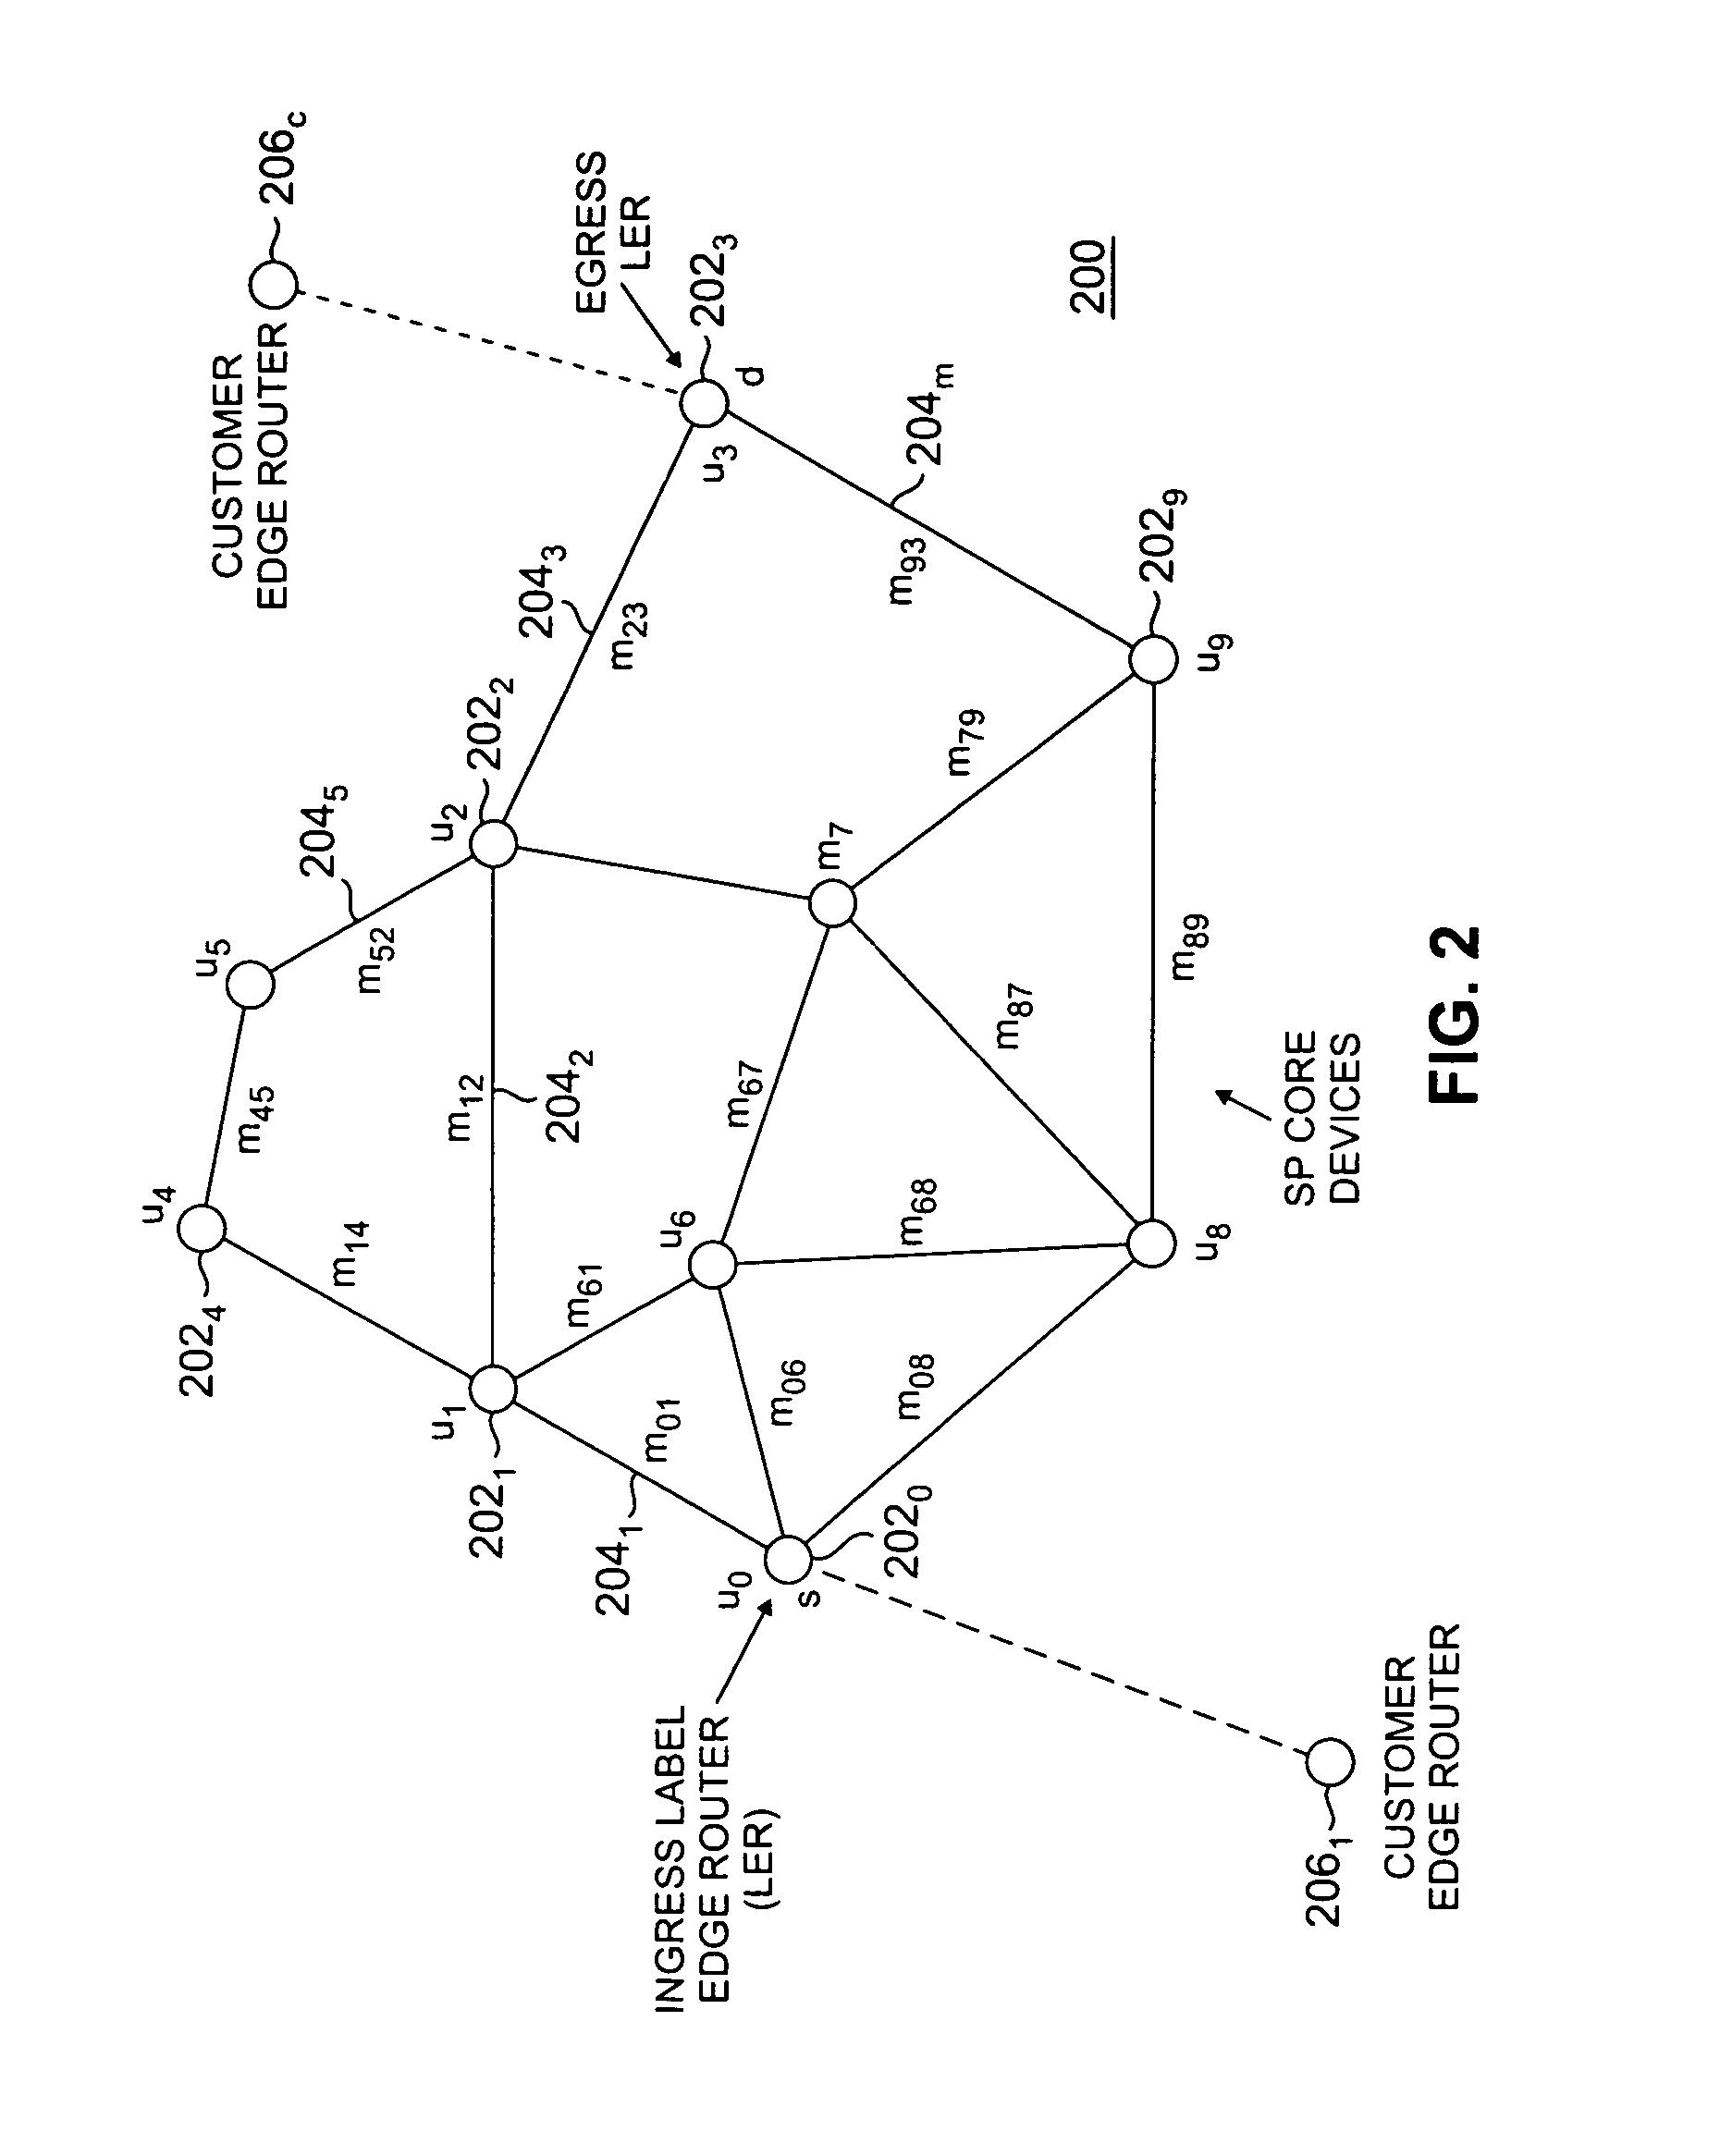 Routing bandwidth guaranteed paths with local restoration in label switched networks